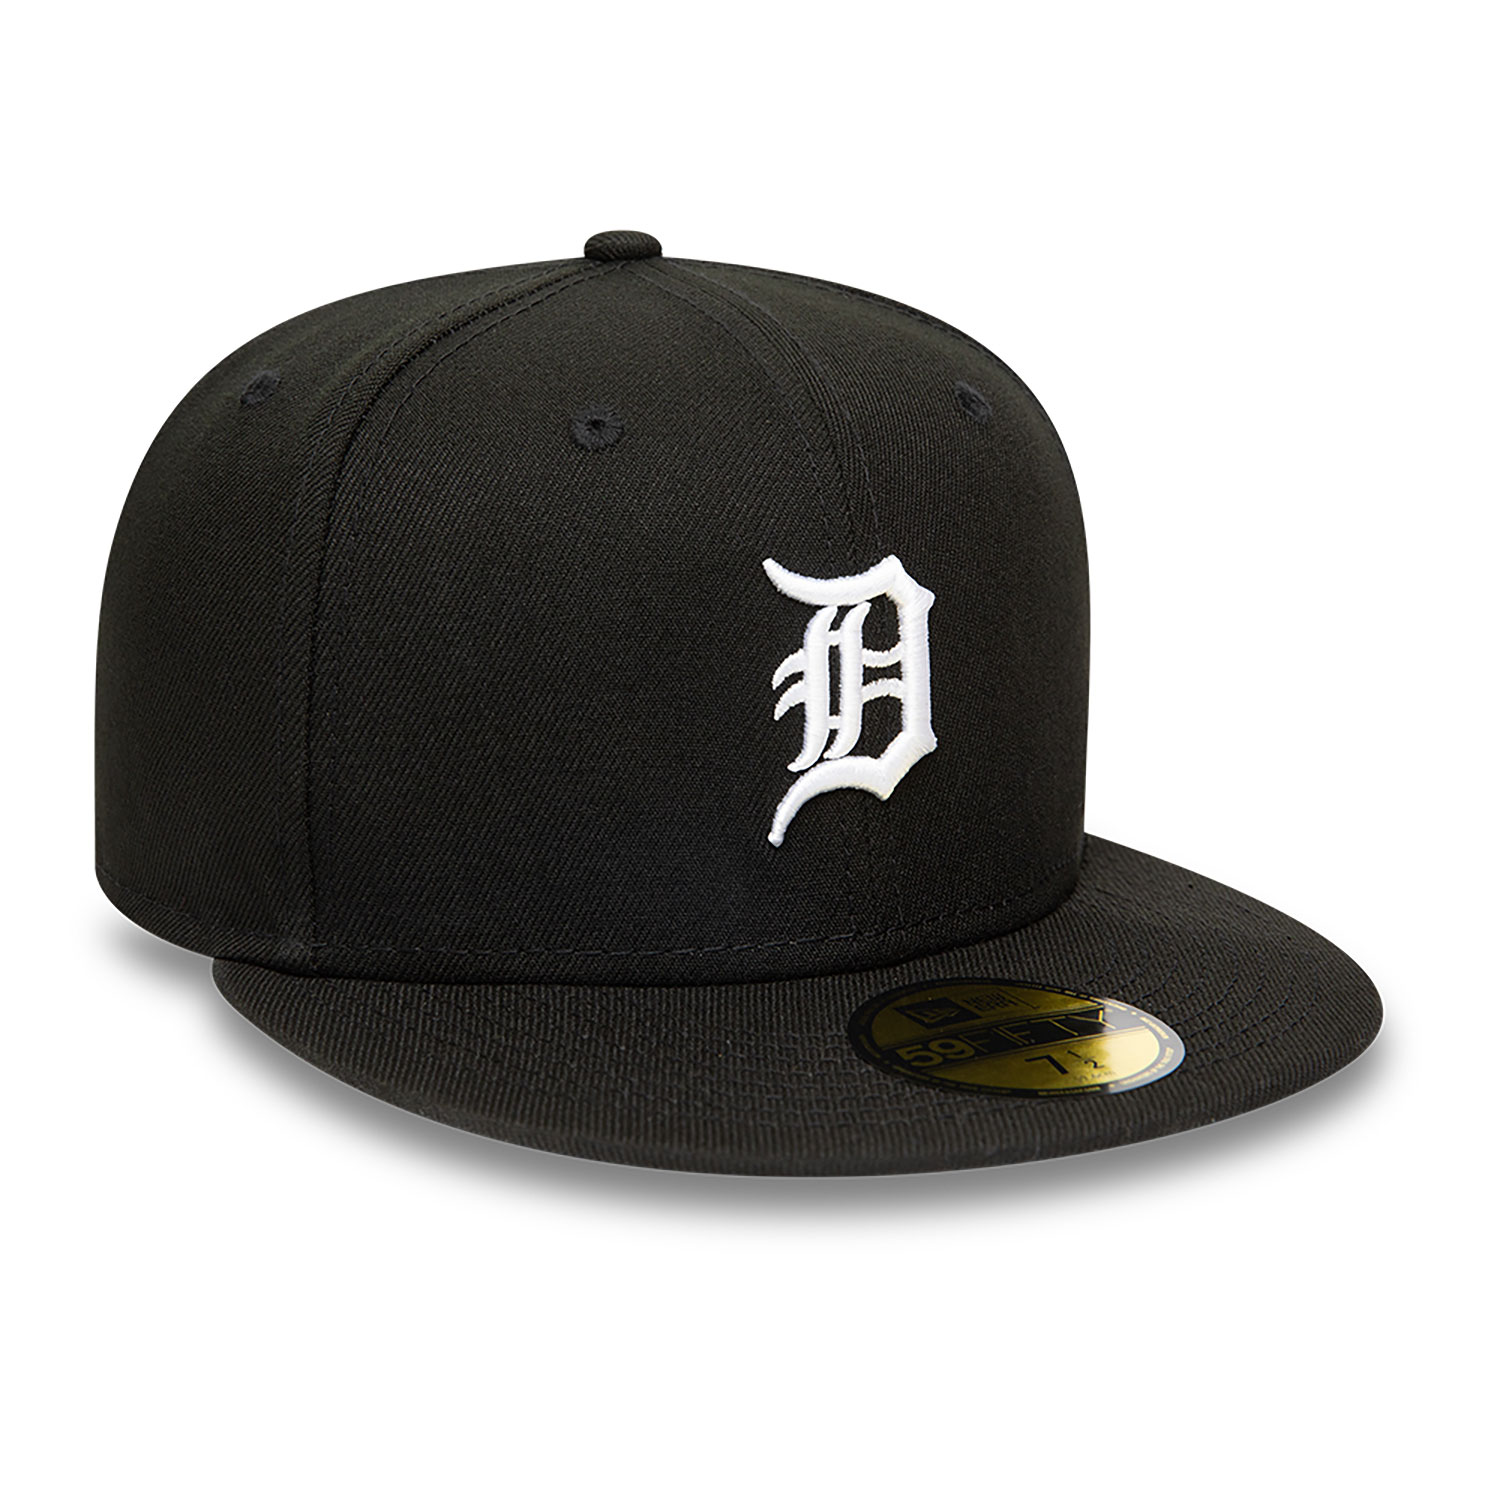 Detroit Tigers MLB Black and White 59FIFTY Fitted Cap